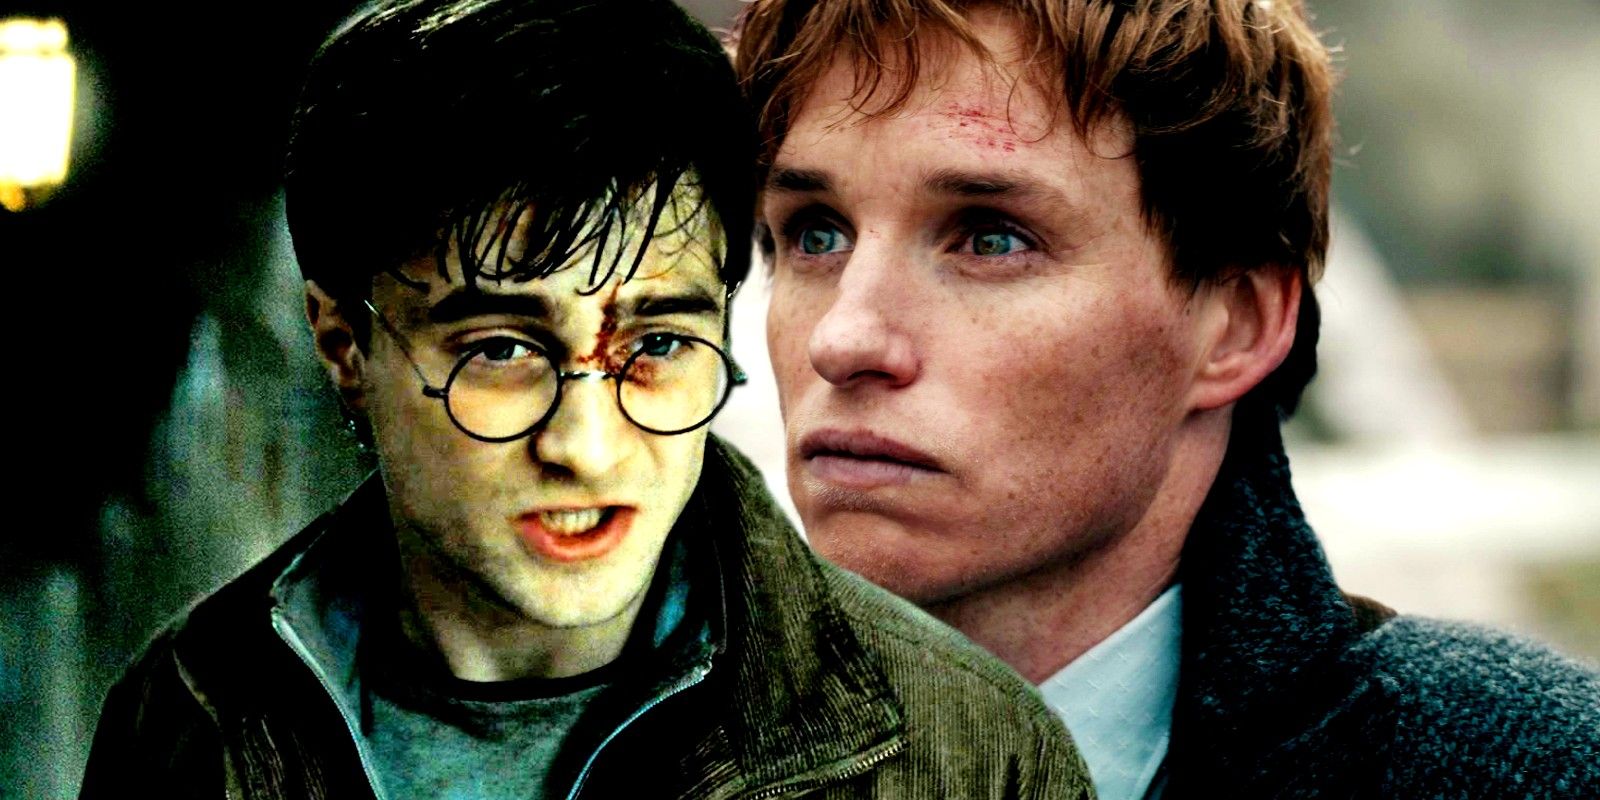 Harry Potter in the Deathly Hallows Part 2 and Newt Scamander in Fantastic Beasts Secrets of Dumbledore